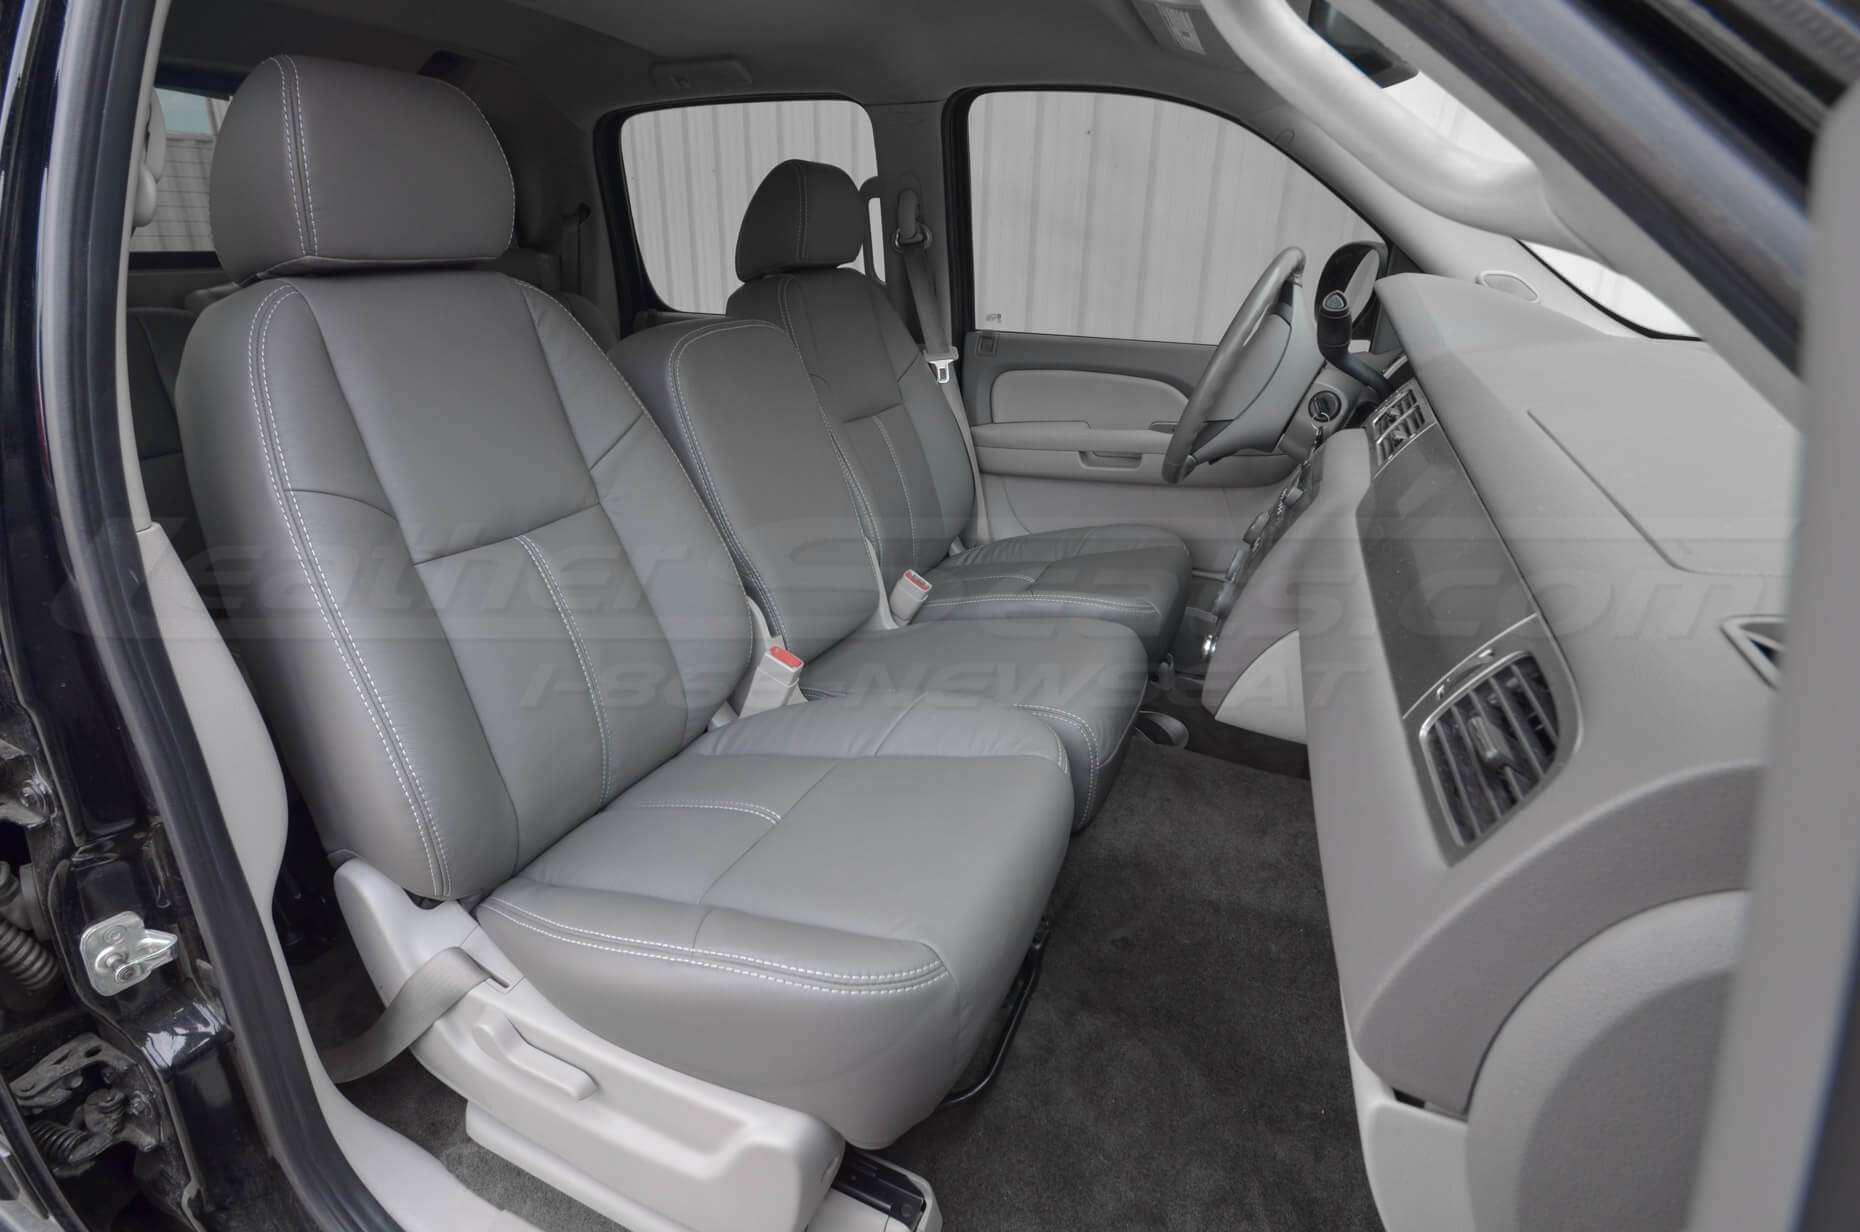 2007-2013 Chevrolet Avalanche with Light Grey leather Seats - Installed - Middle Console Seat up